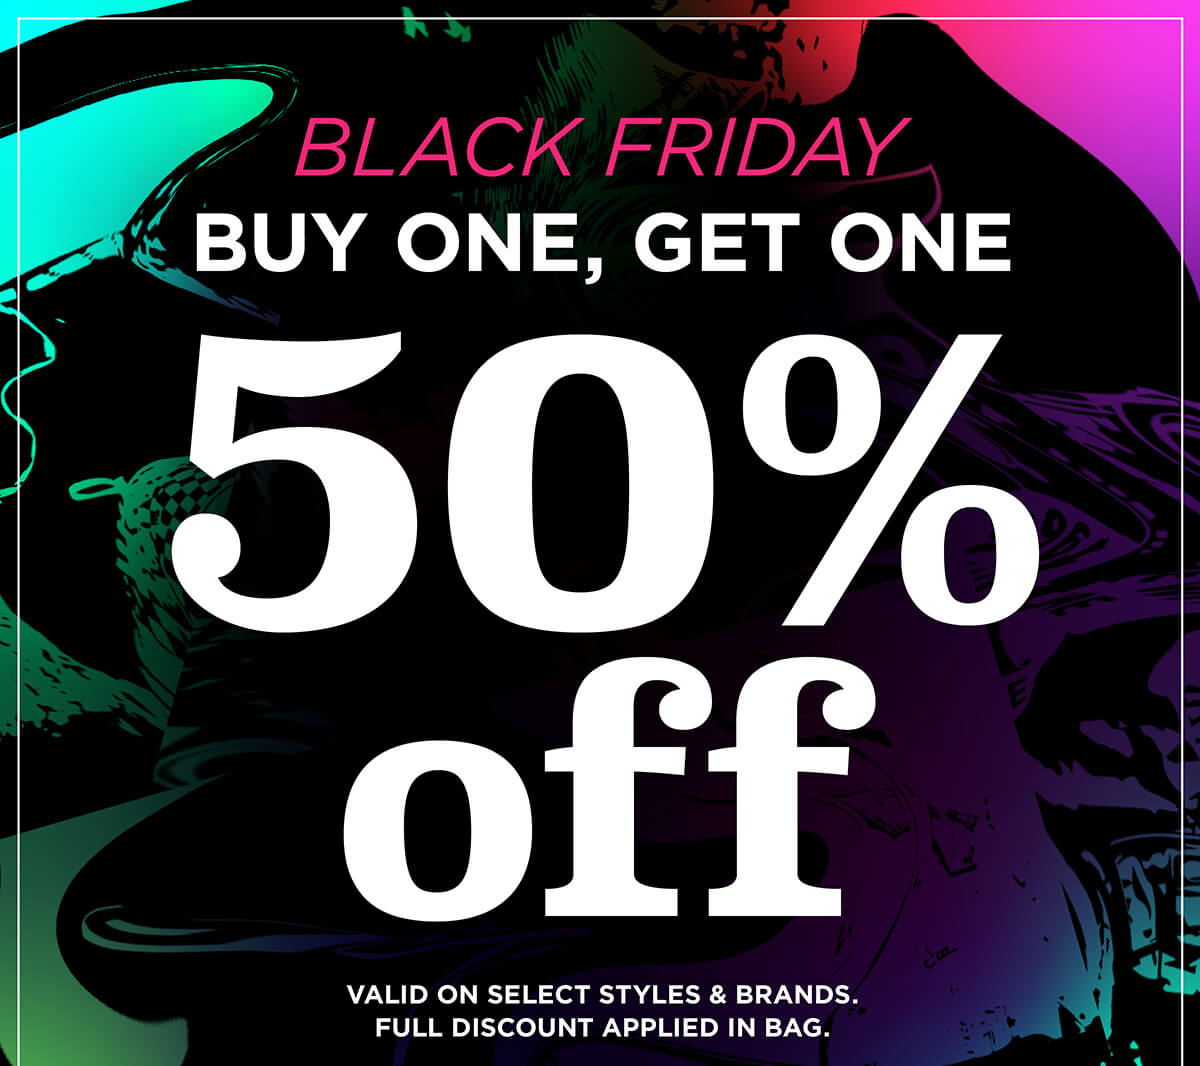 BUY 1 GET 1 50% OFF - HUNDREDS OF ITEMS ADDED FOR BLACK FRIDAY